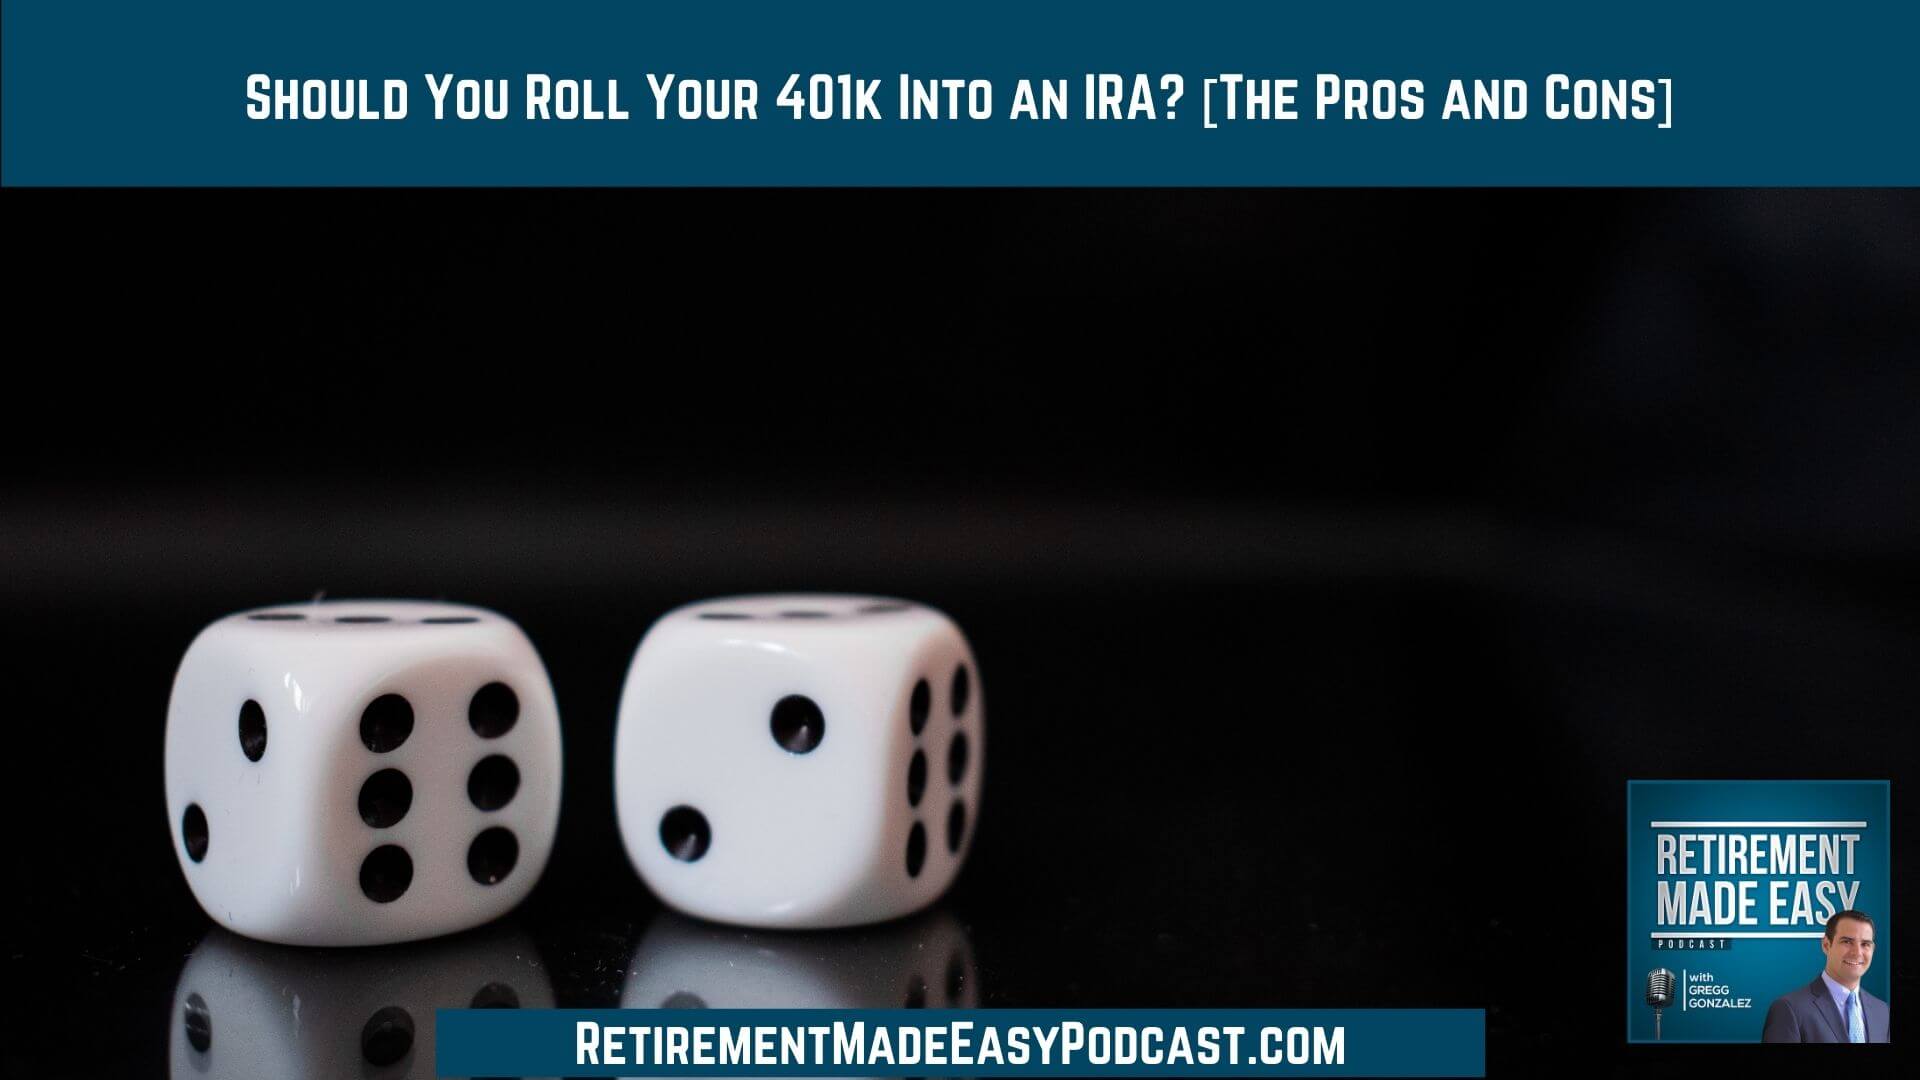 Should You Roll Your 401k Into an IRA? [The Pros and Cons], Ep #44 ...